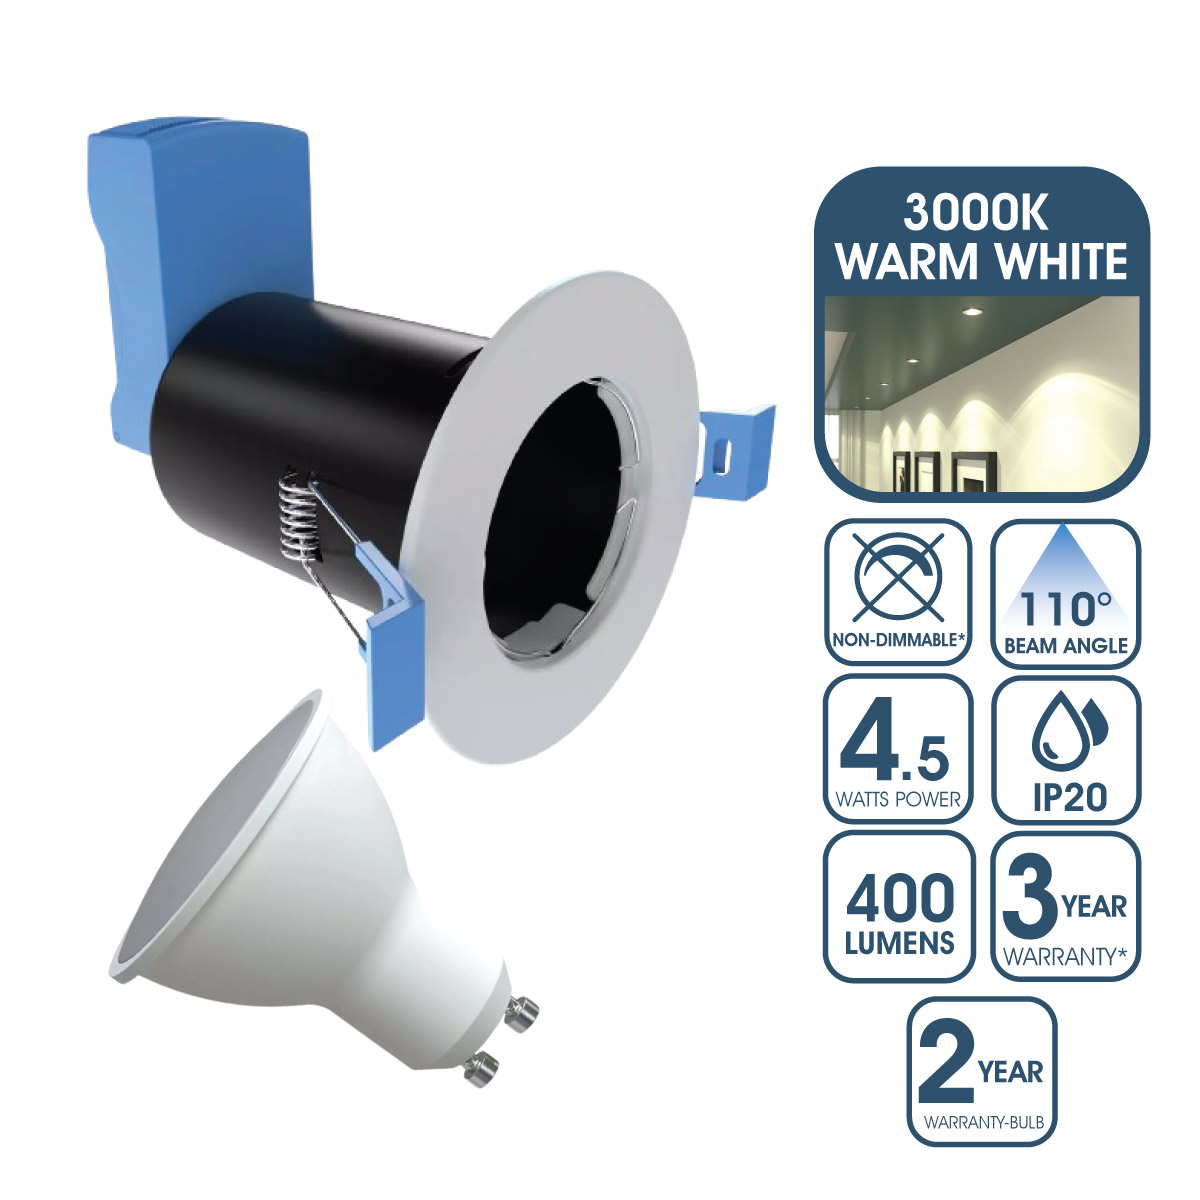 View Fire Rated Downlight GU10 Fixed White Finish With a 45w Warm White GU10 Bulb information